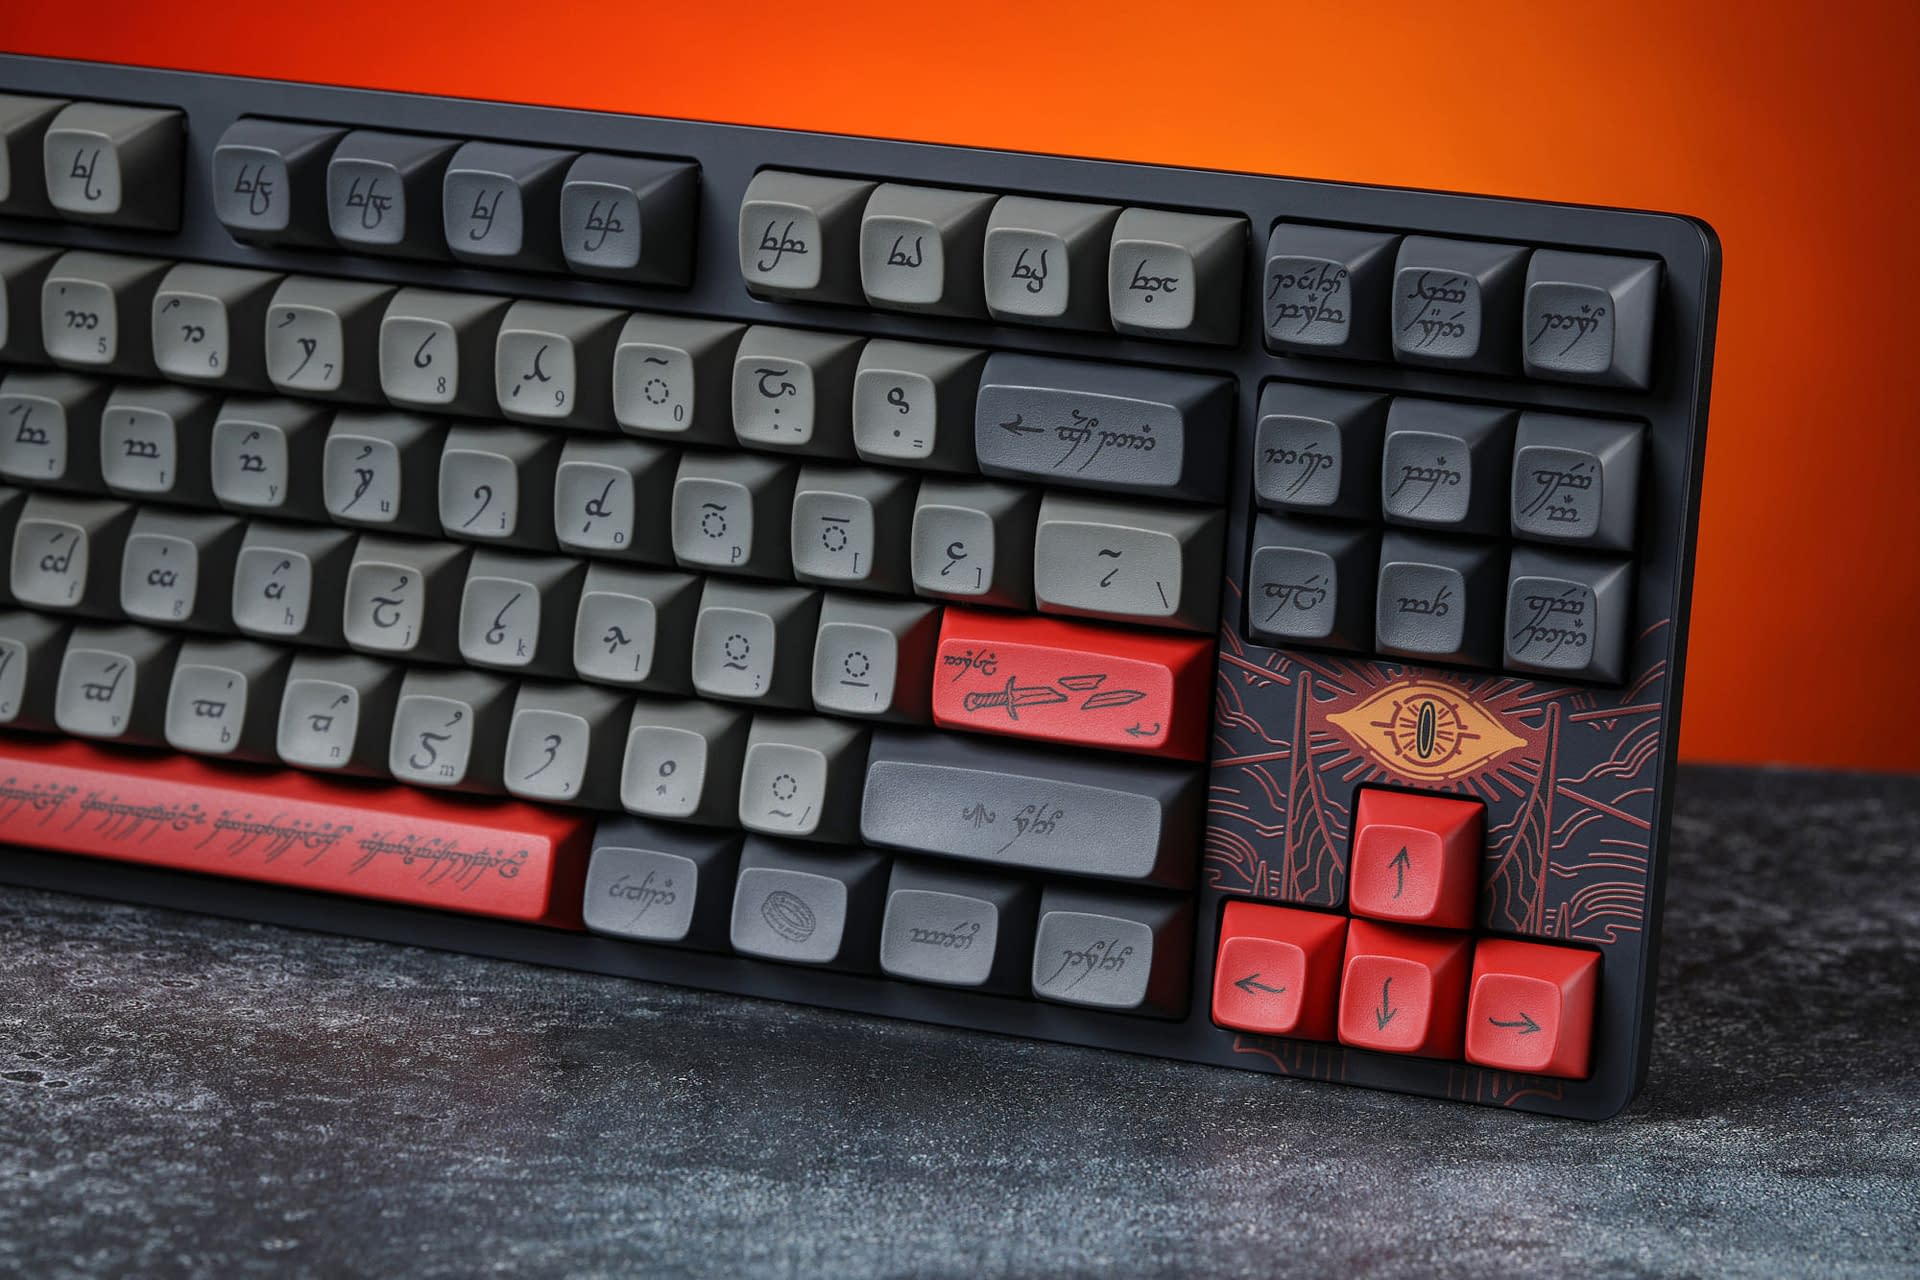 Return to Mordor with Drop's Latest The Lord of the Rings Keyboard